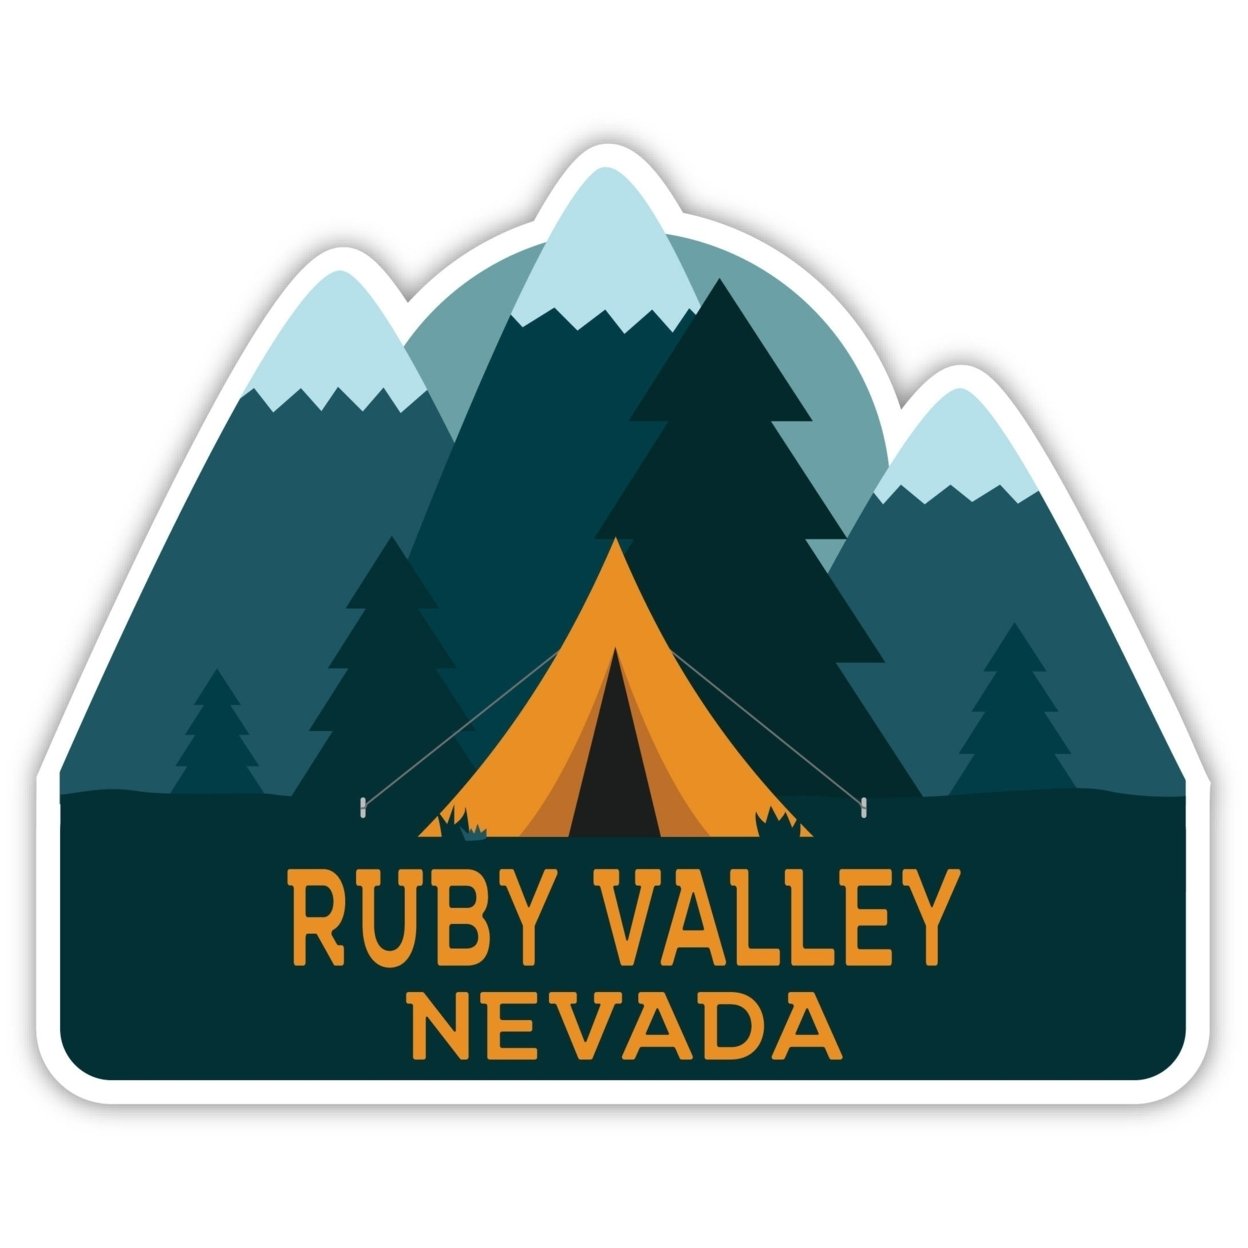 Ruby Valley Nevada Souvenir Decorative Stickers (Choose Theme And Size) - Single Unit, 4-Inch, Tent